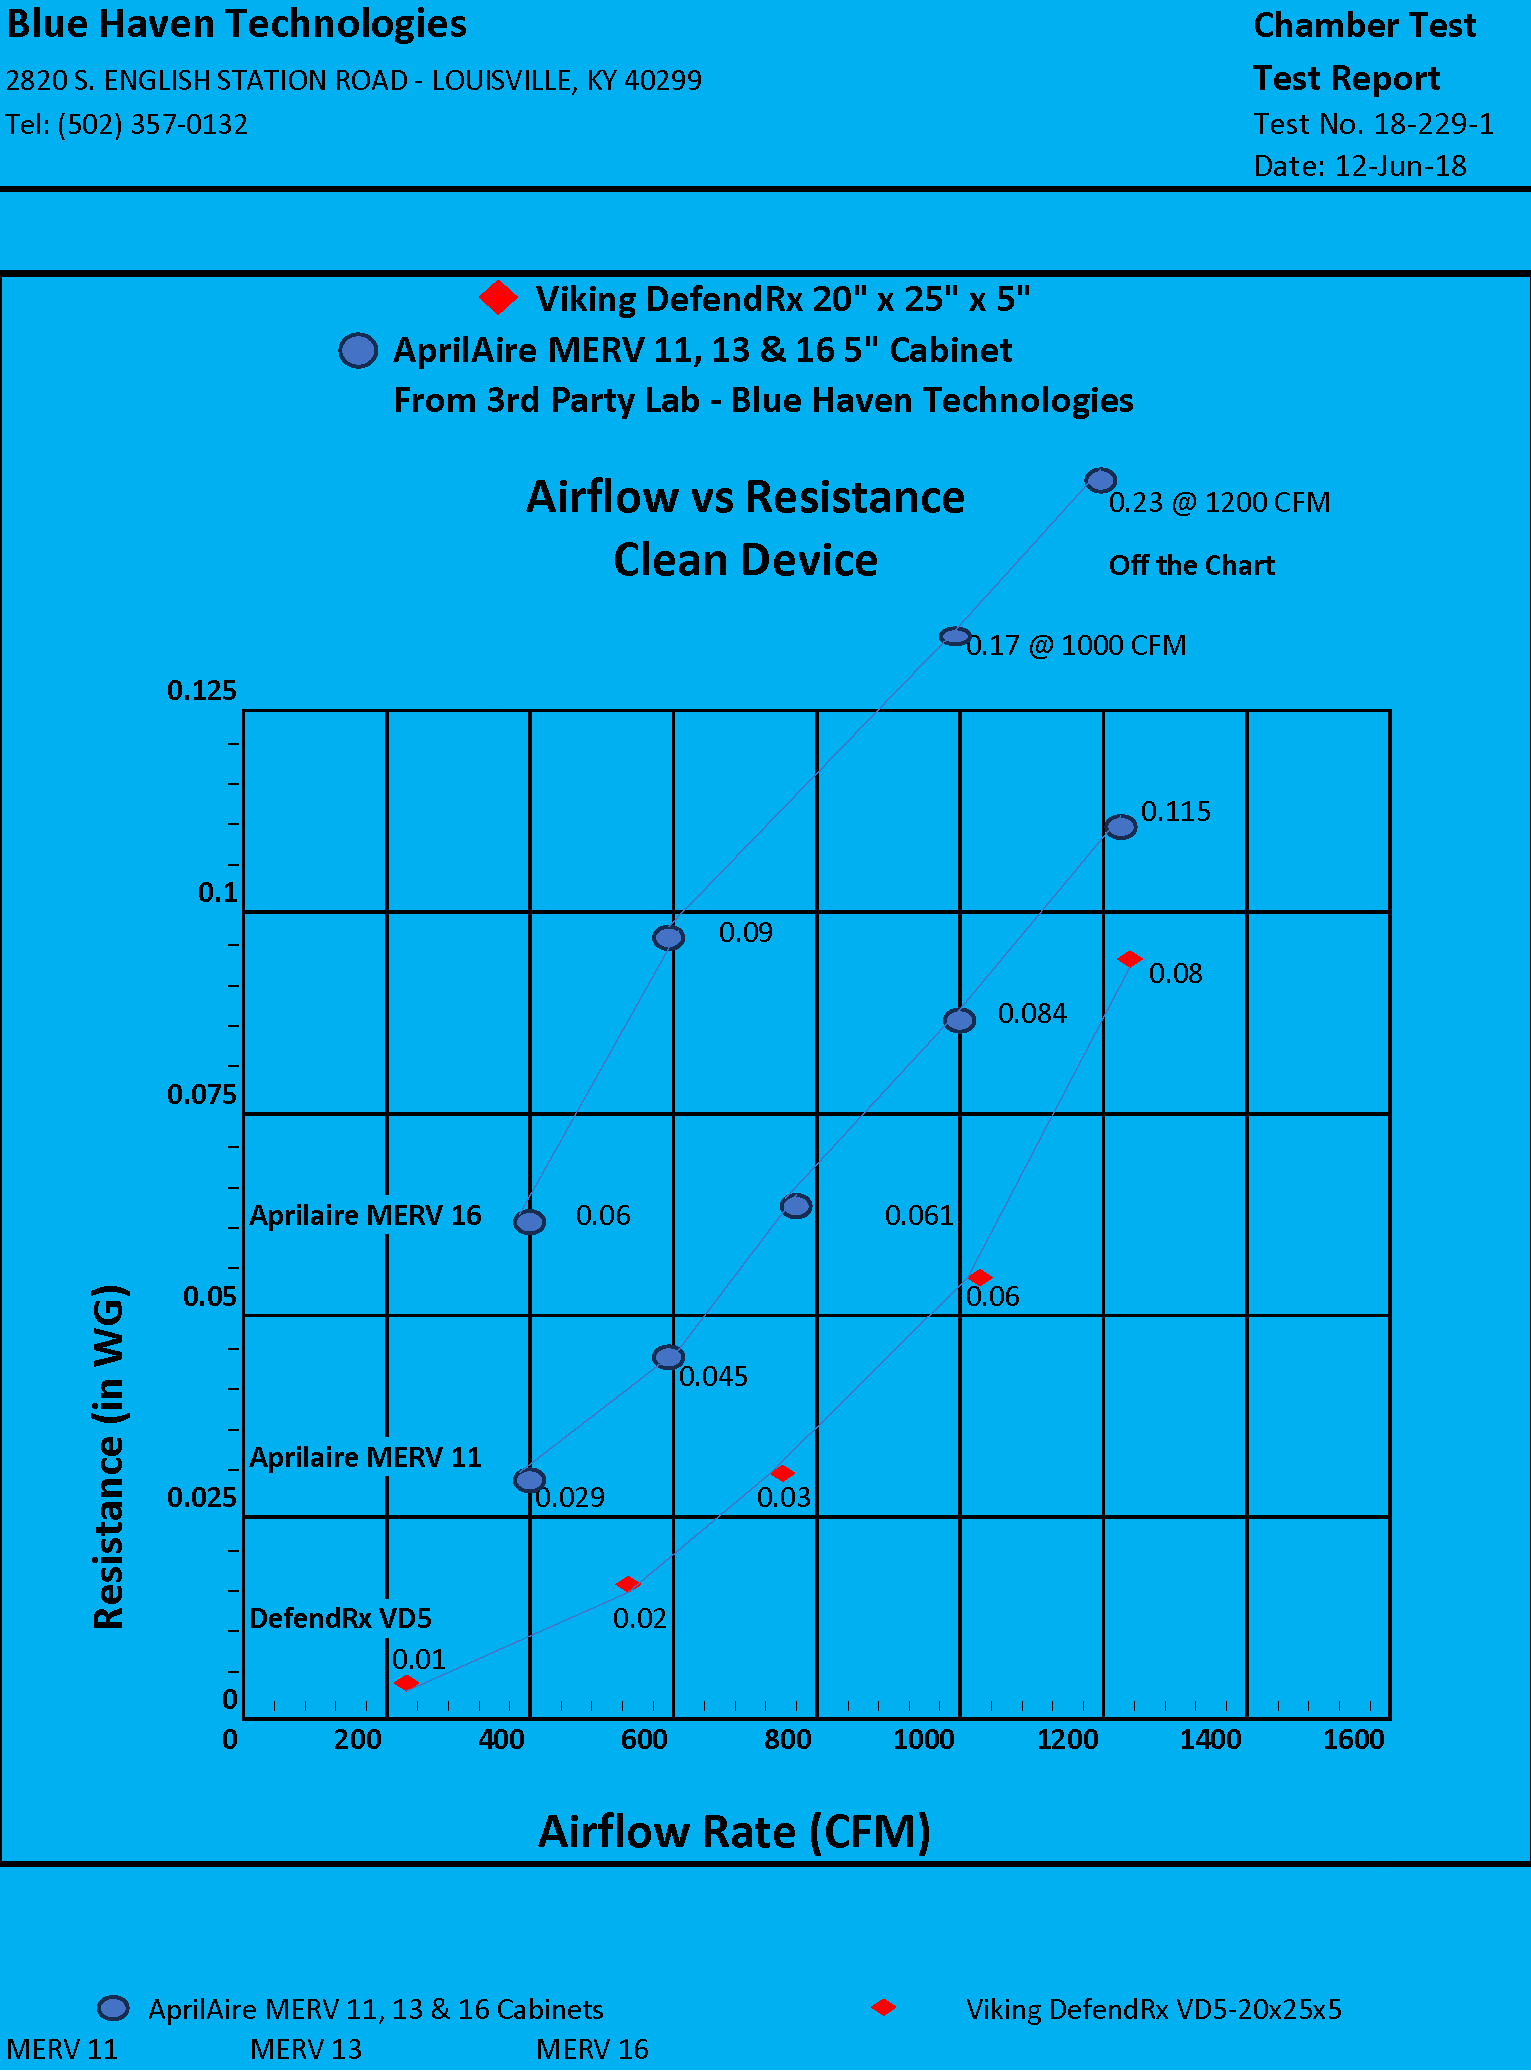 Compare Aprilaire MERV11 MERV16 to Incredibly Low Static Pressure Test Results of the Defendx 5 Inch Polarized Media Filter